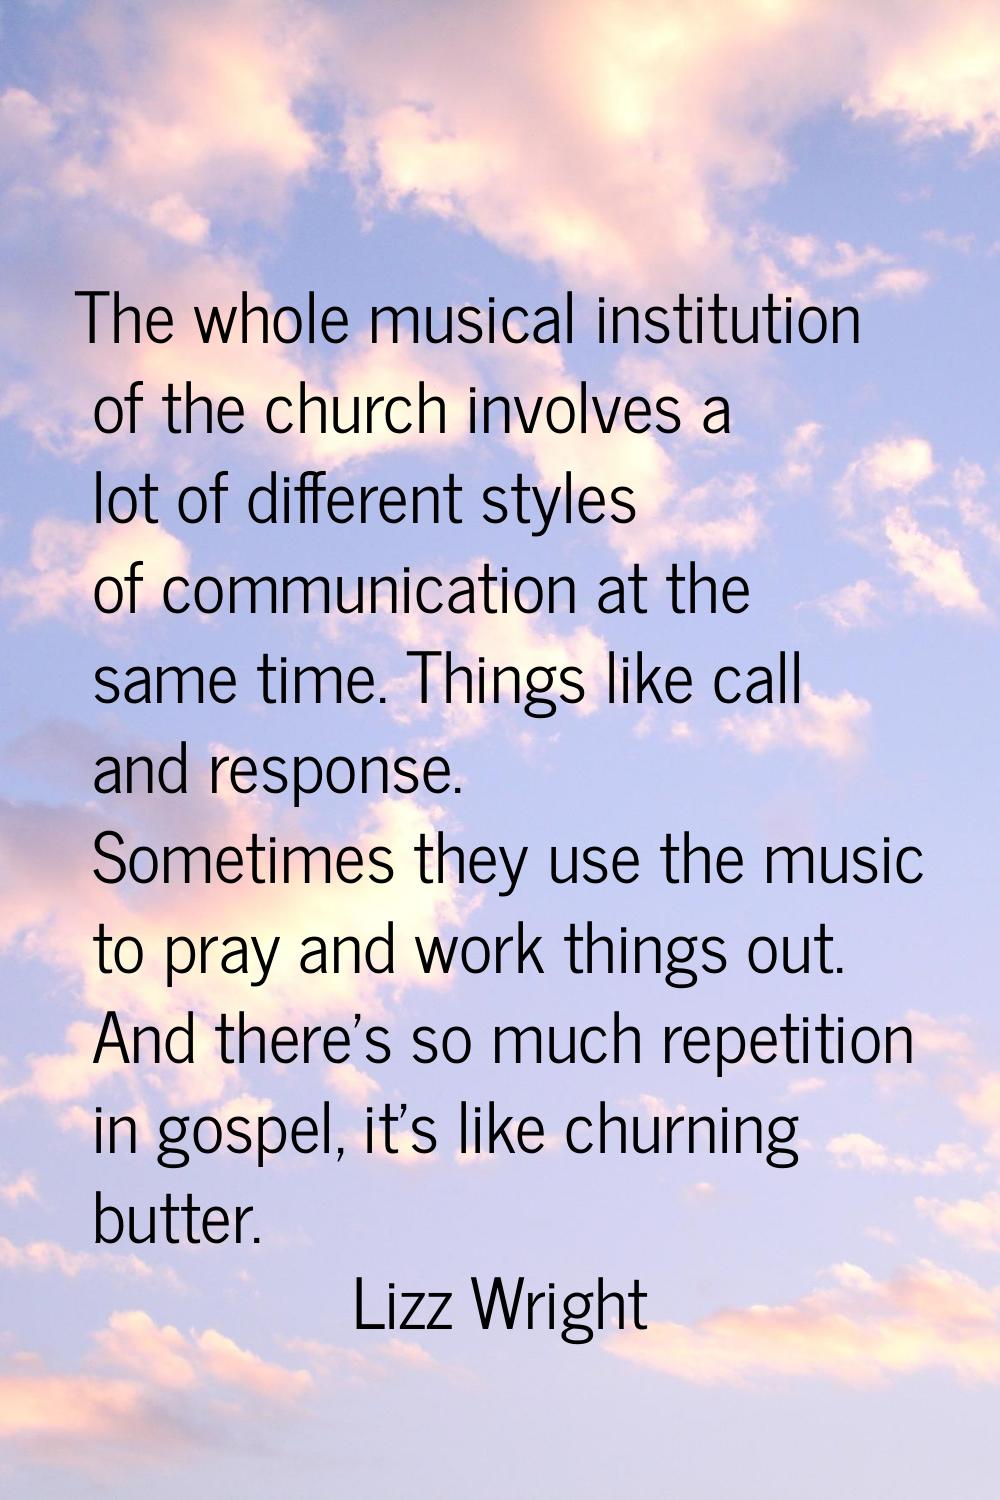 The whole musical institution of the church involves a lot of different styles of communication at 